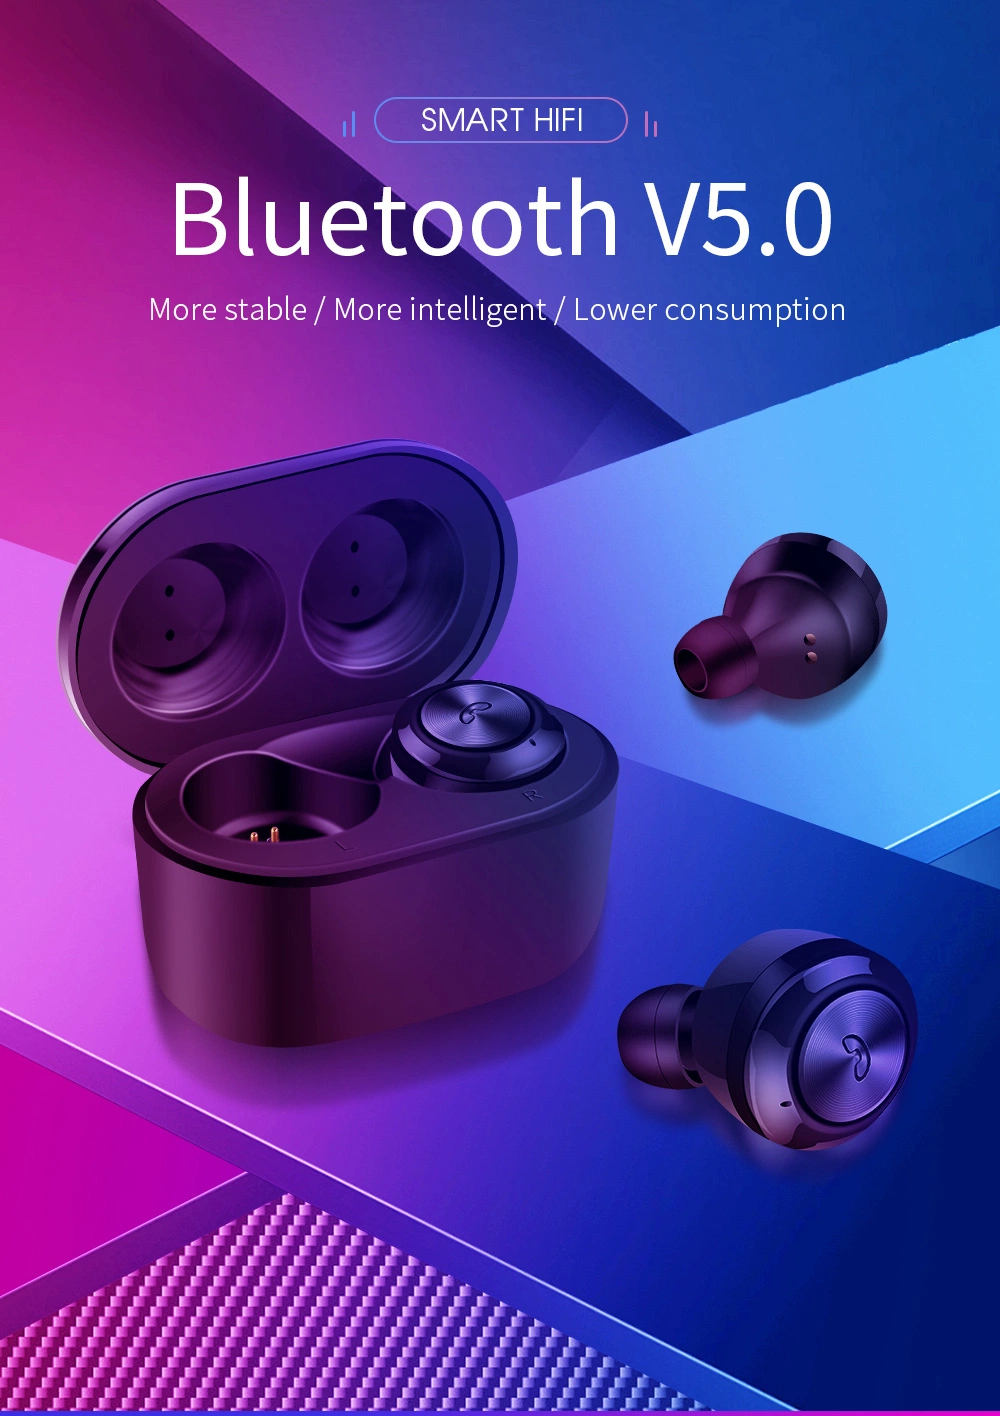 A6 Tws Bt5.0 in-Ear Wireless Earphones, Sports Earbuds Gaming Headphone for All Smart Phone